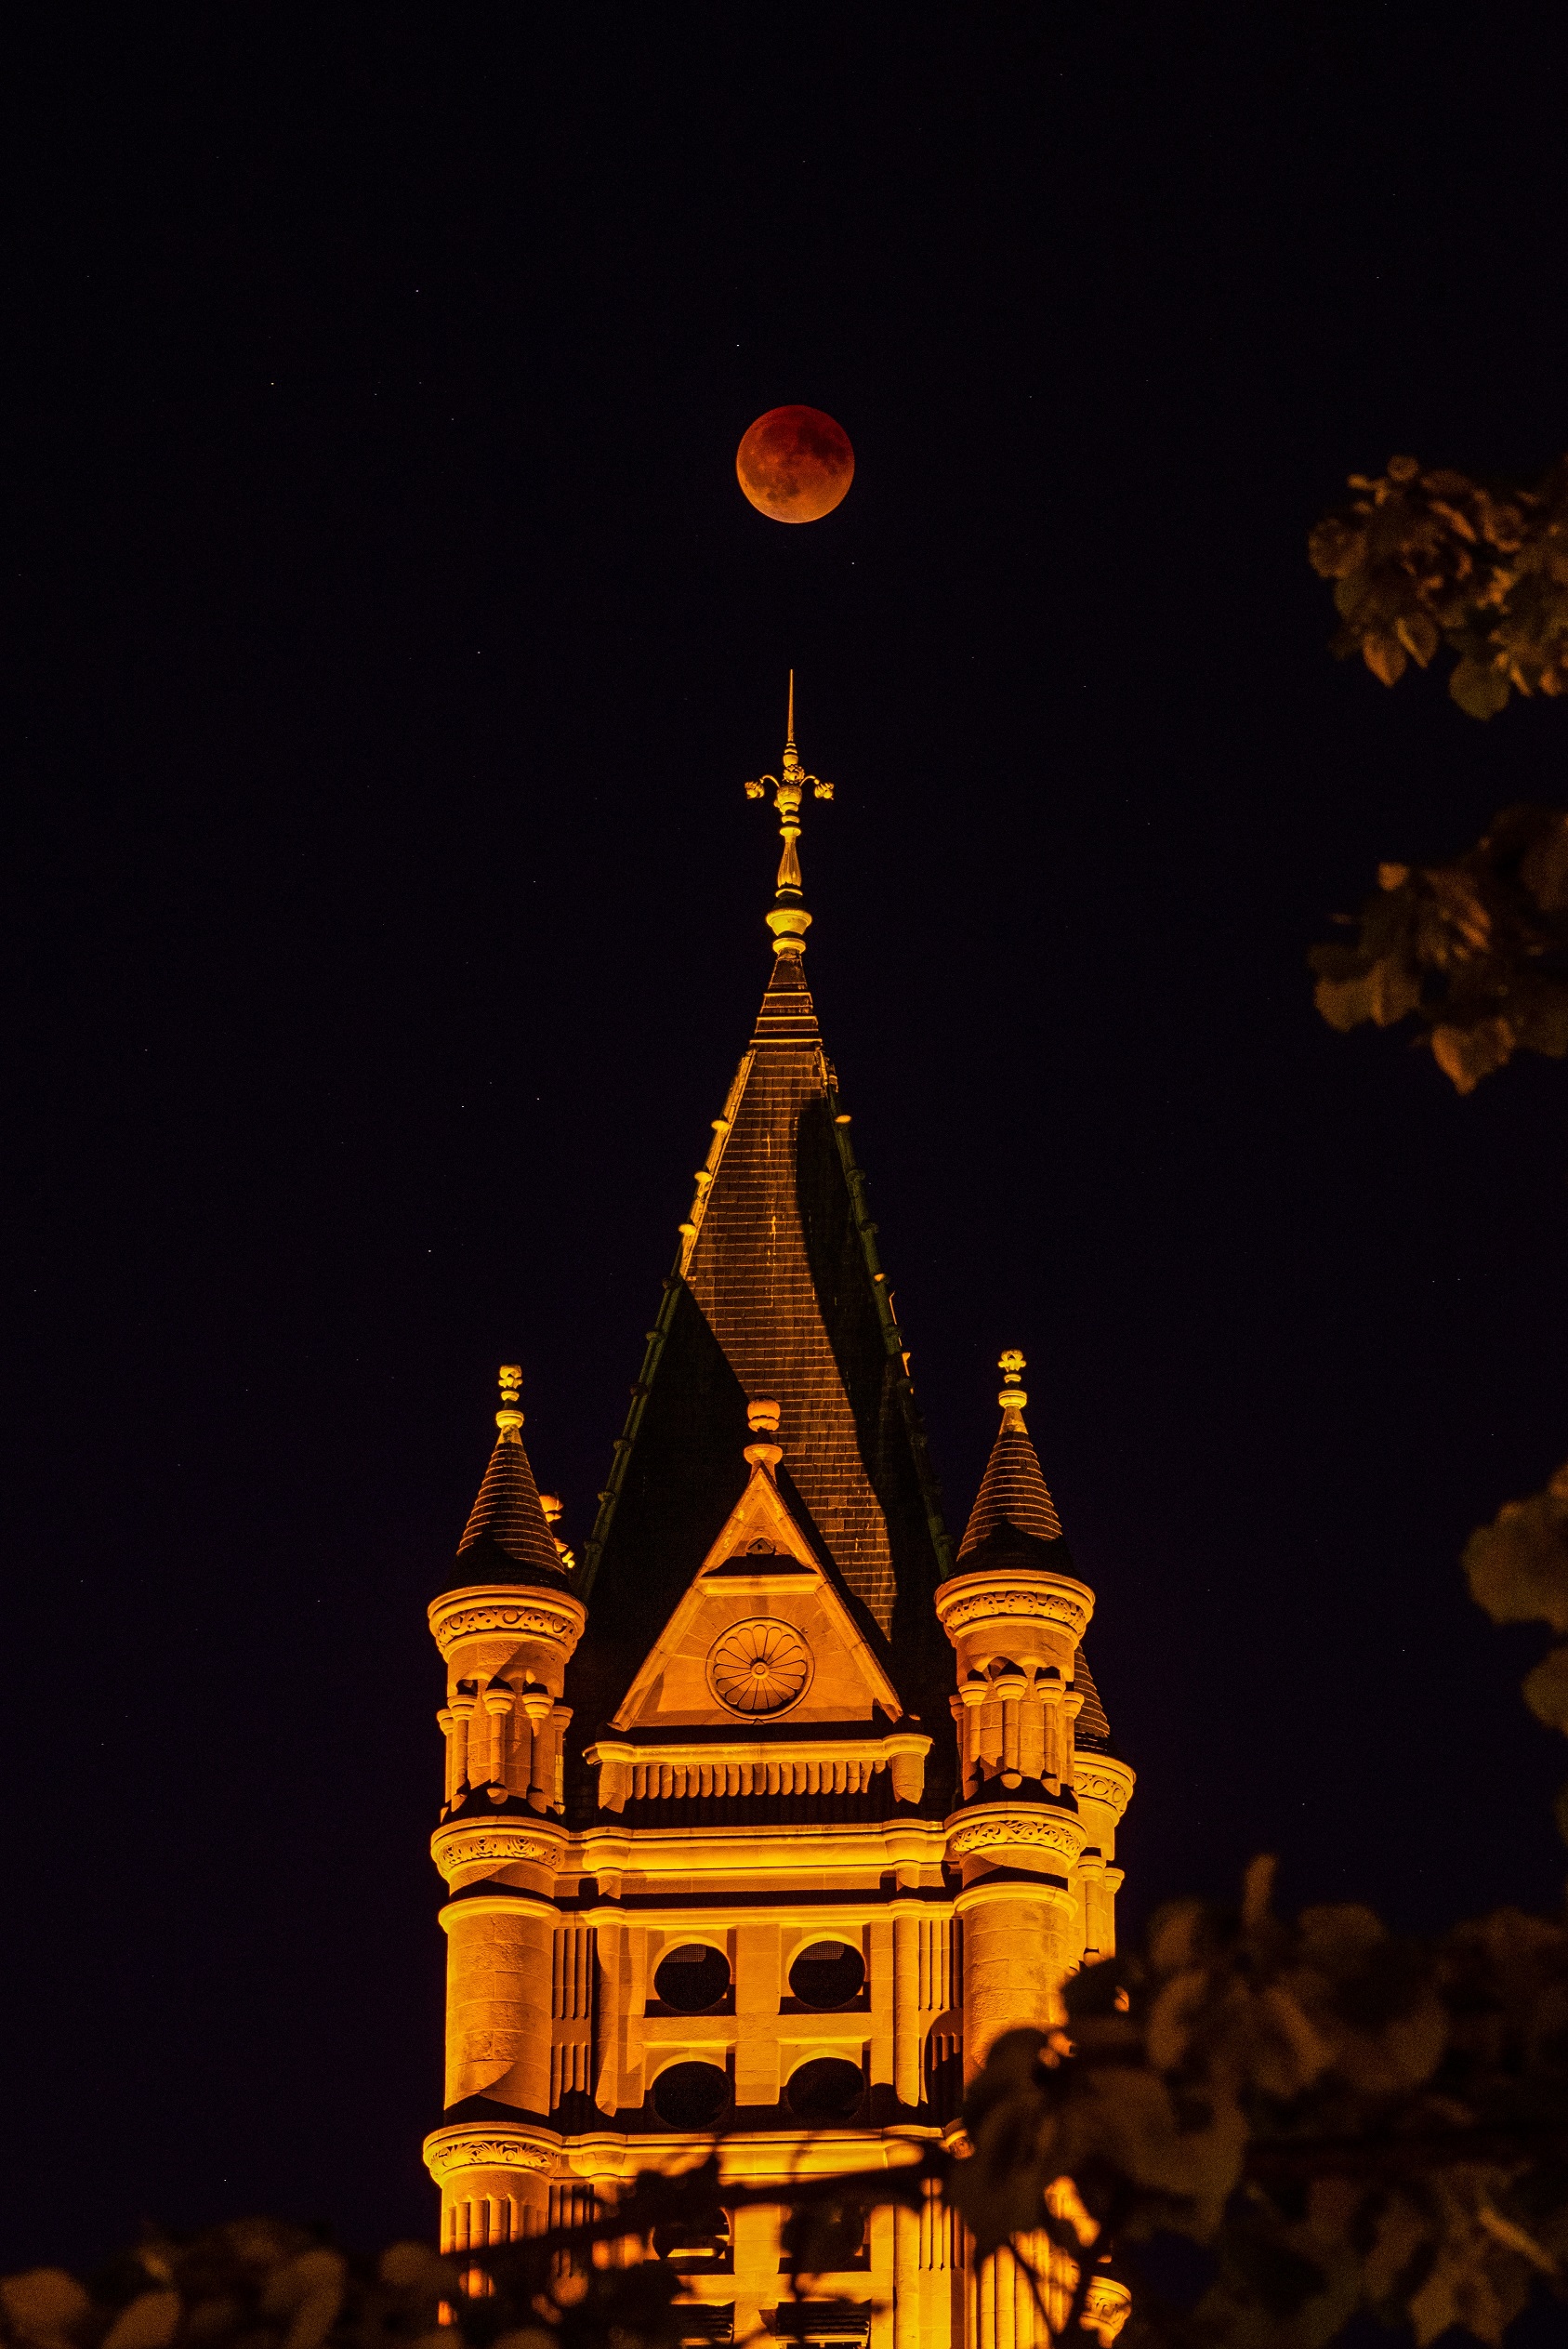 lunar eclipse over Crouse College